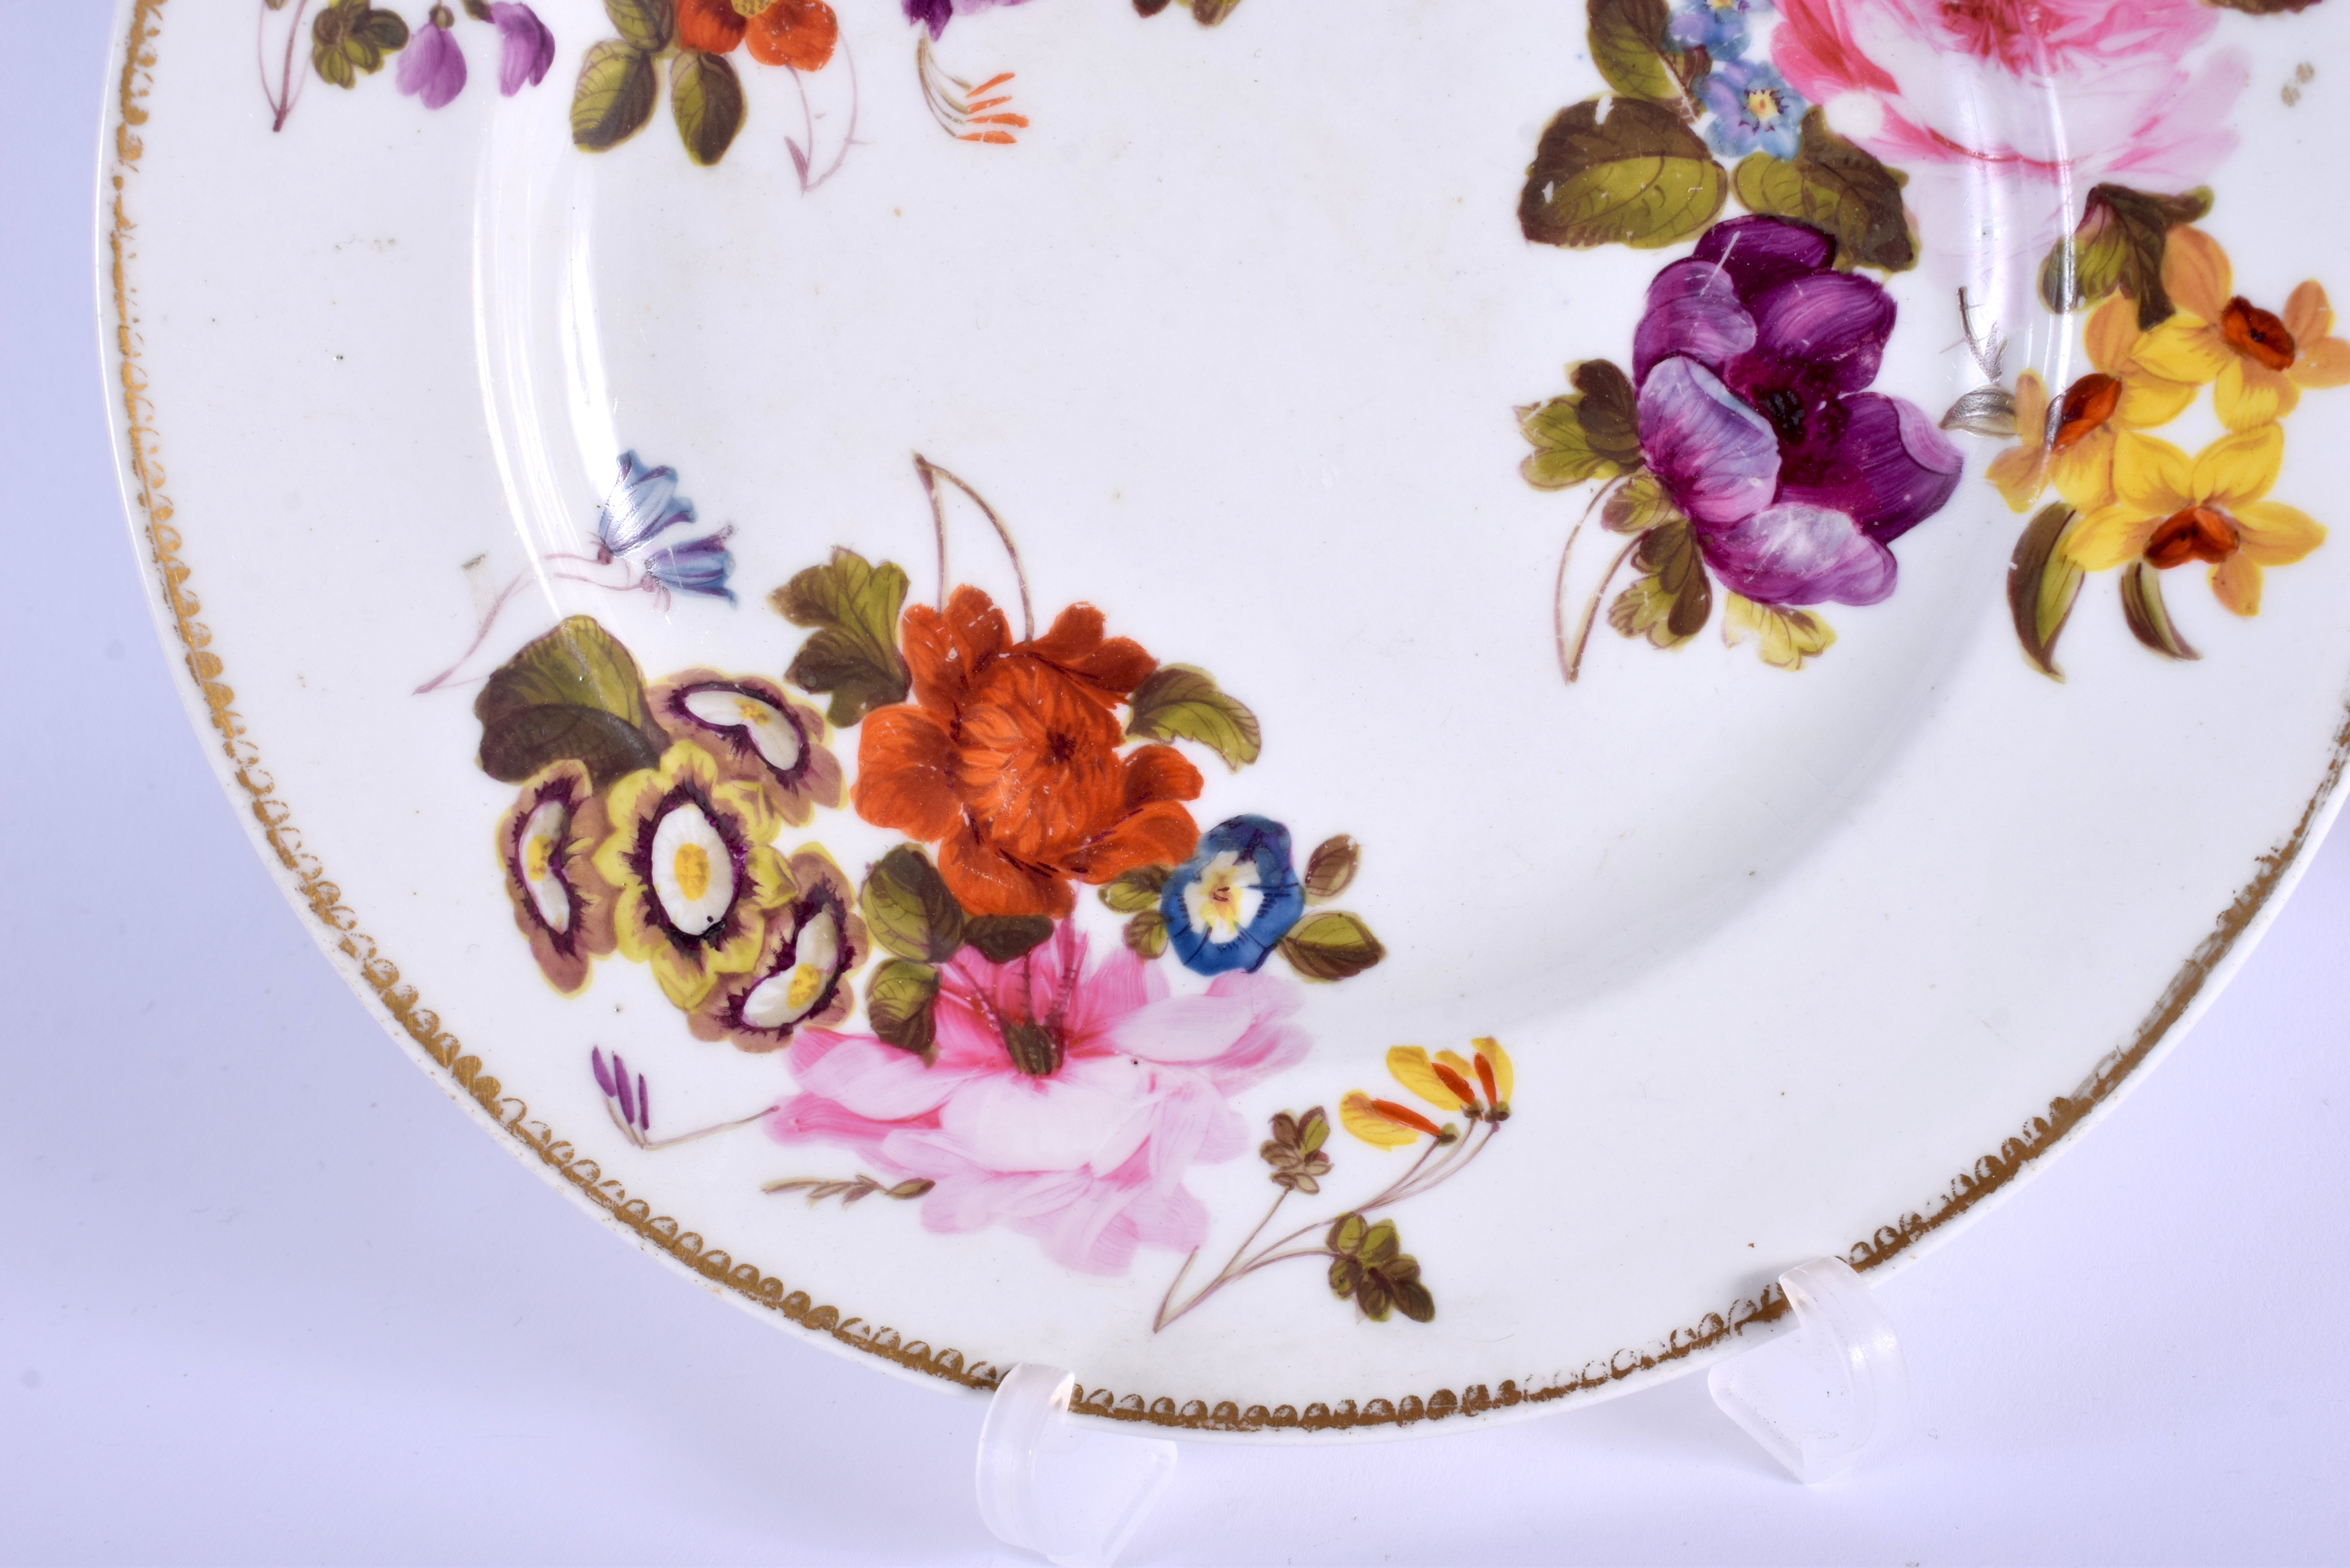 A PAIR OF EARLY 19TH CENTURY DERBY PORCELAIN PLATES painted with botanical sprays. 20 cm diameter. - Image 5 of 8